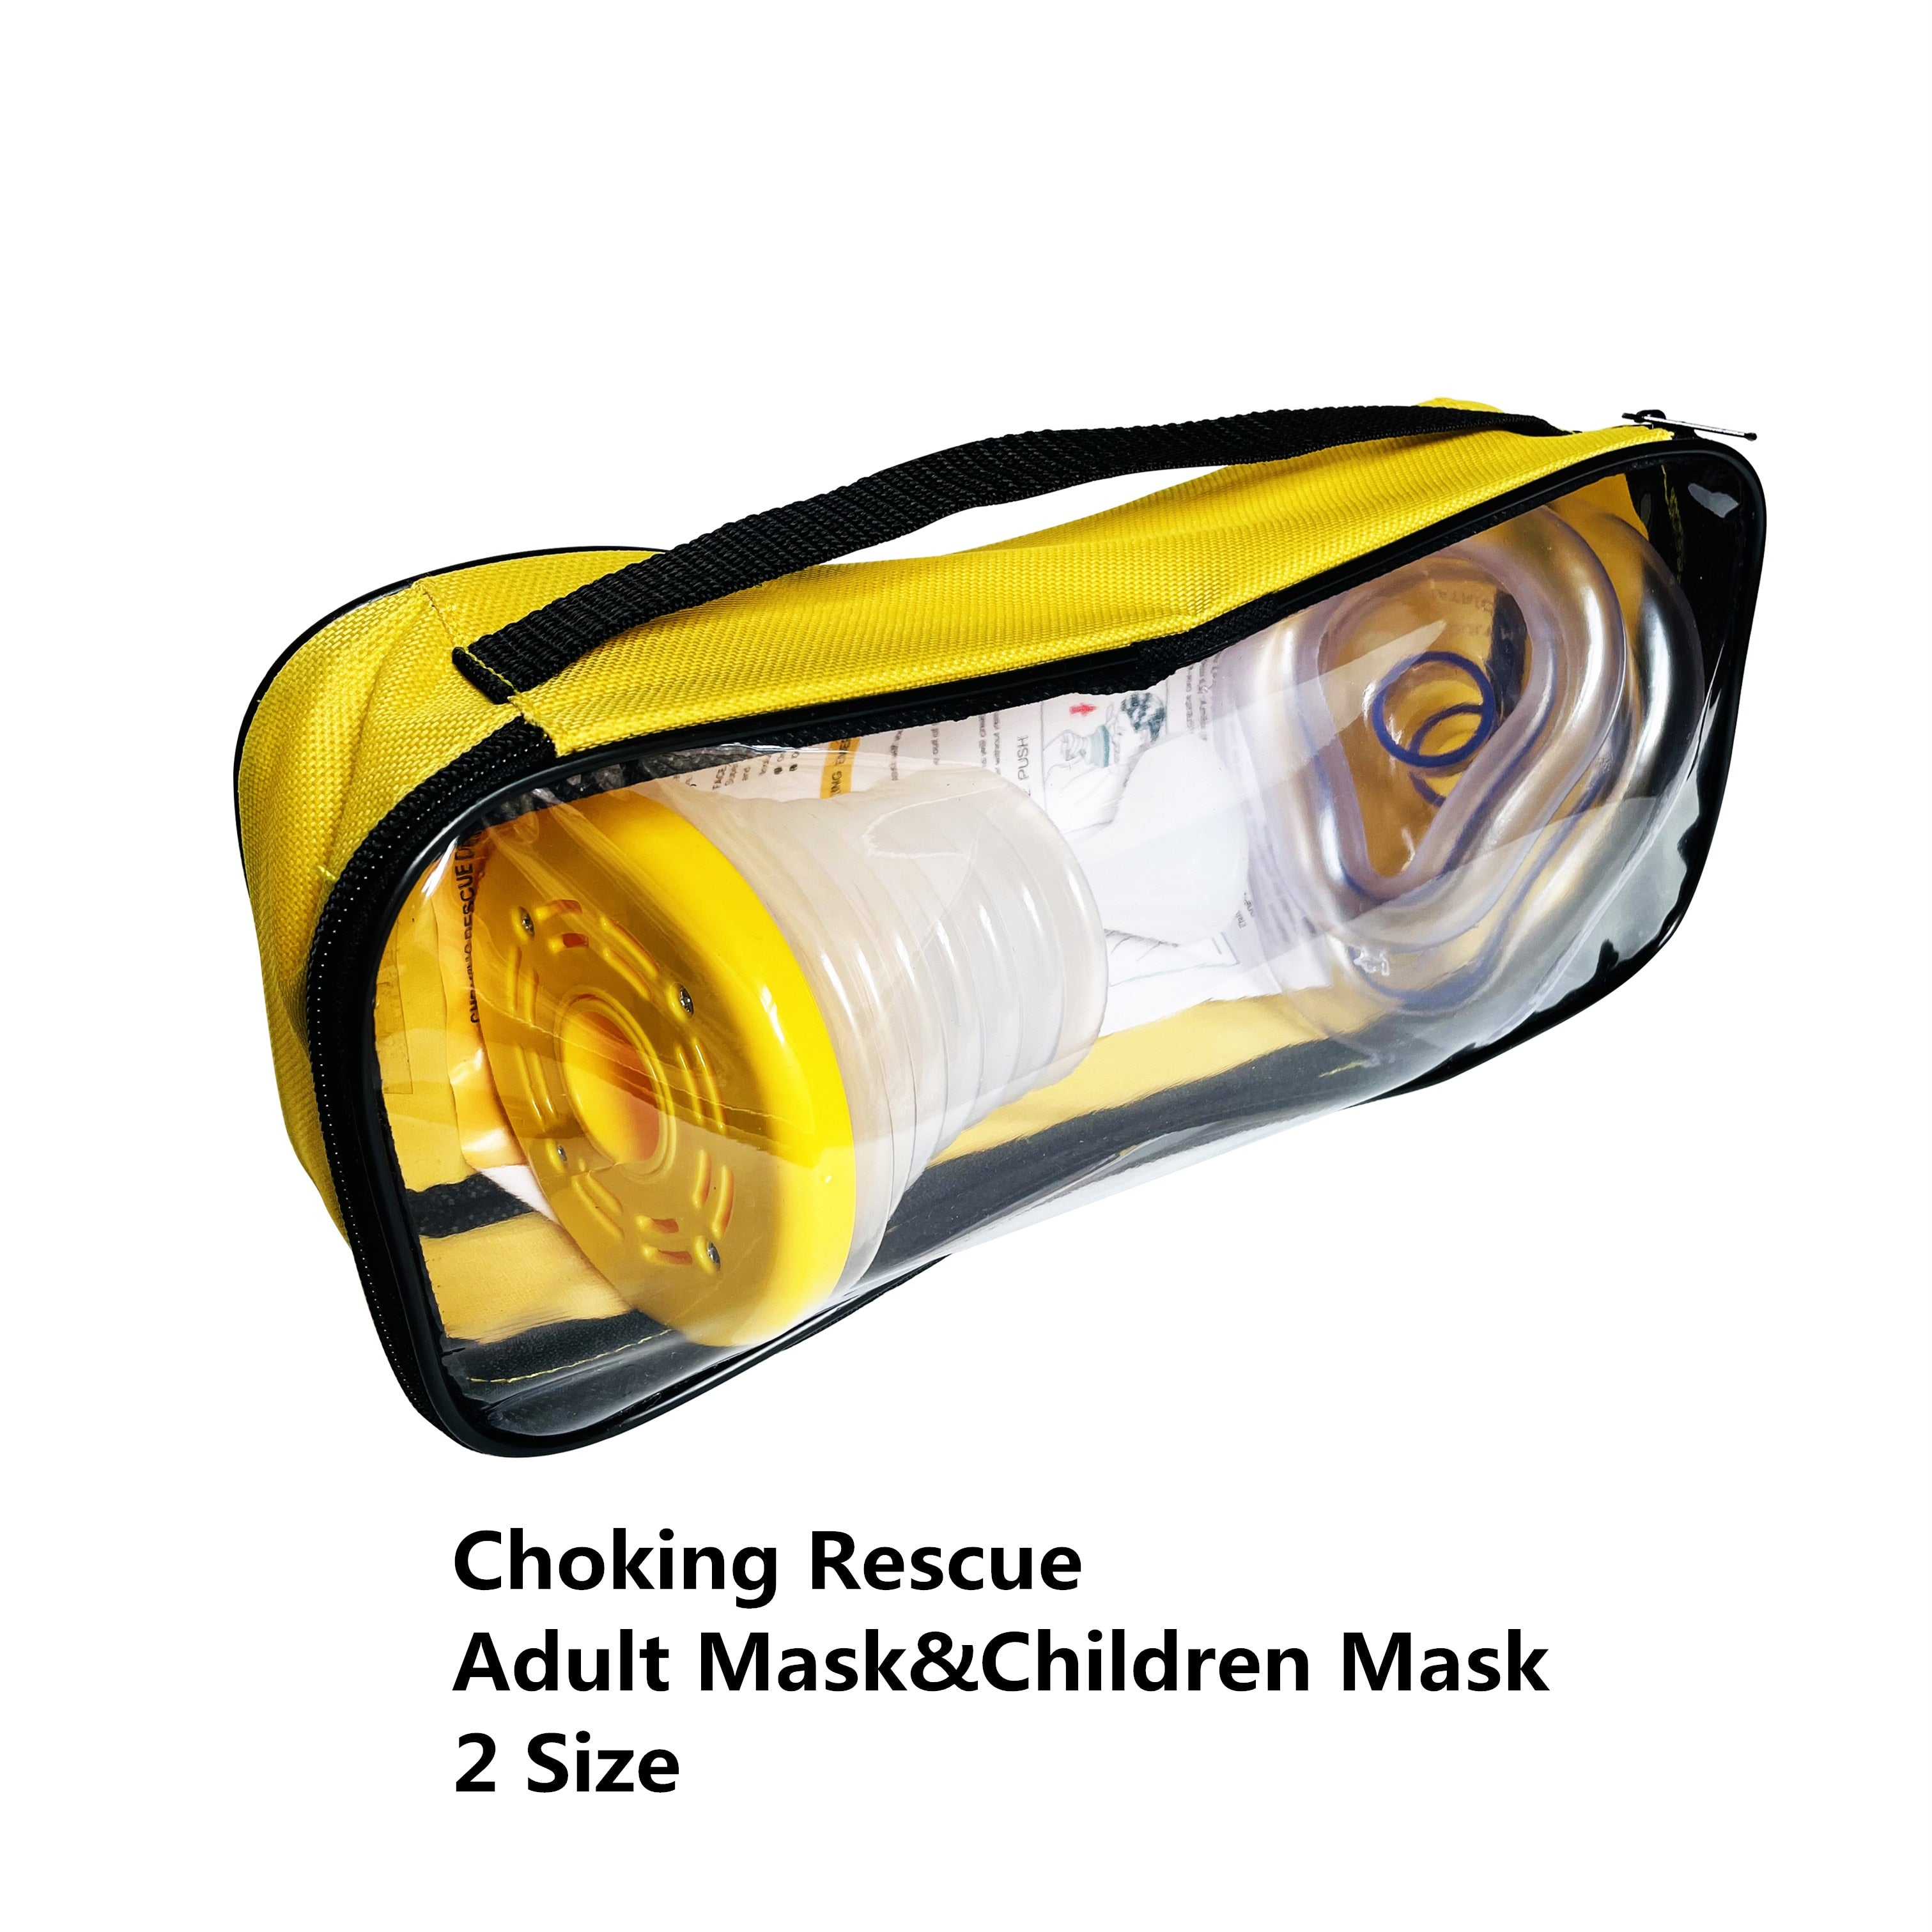 Portable Choking Rescue Device Health Care Choking Emergency Device CPR Asphyxia First Aid Choking Device for Adult Children